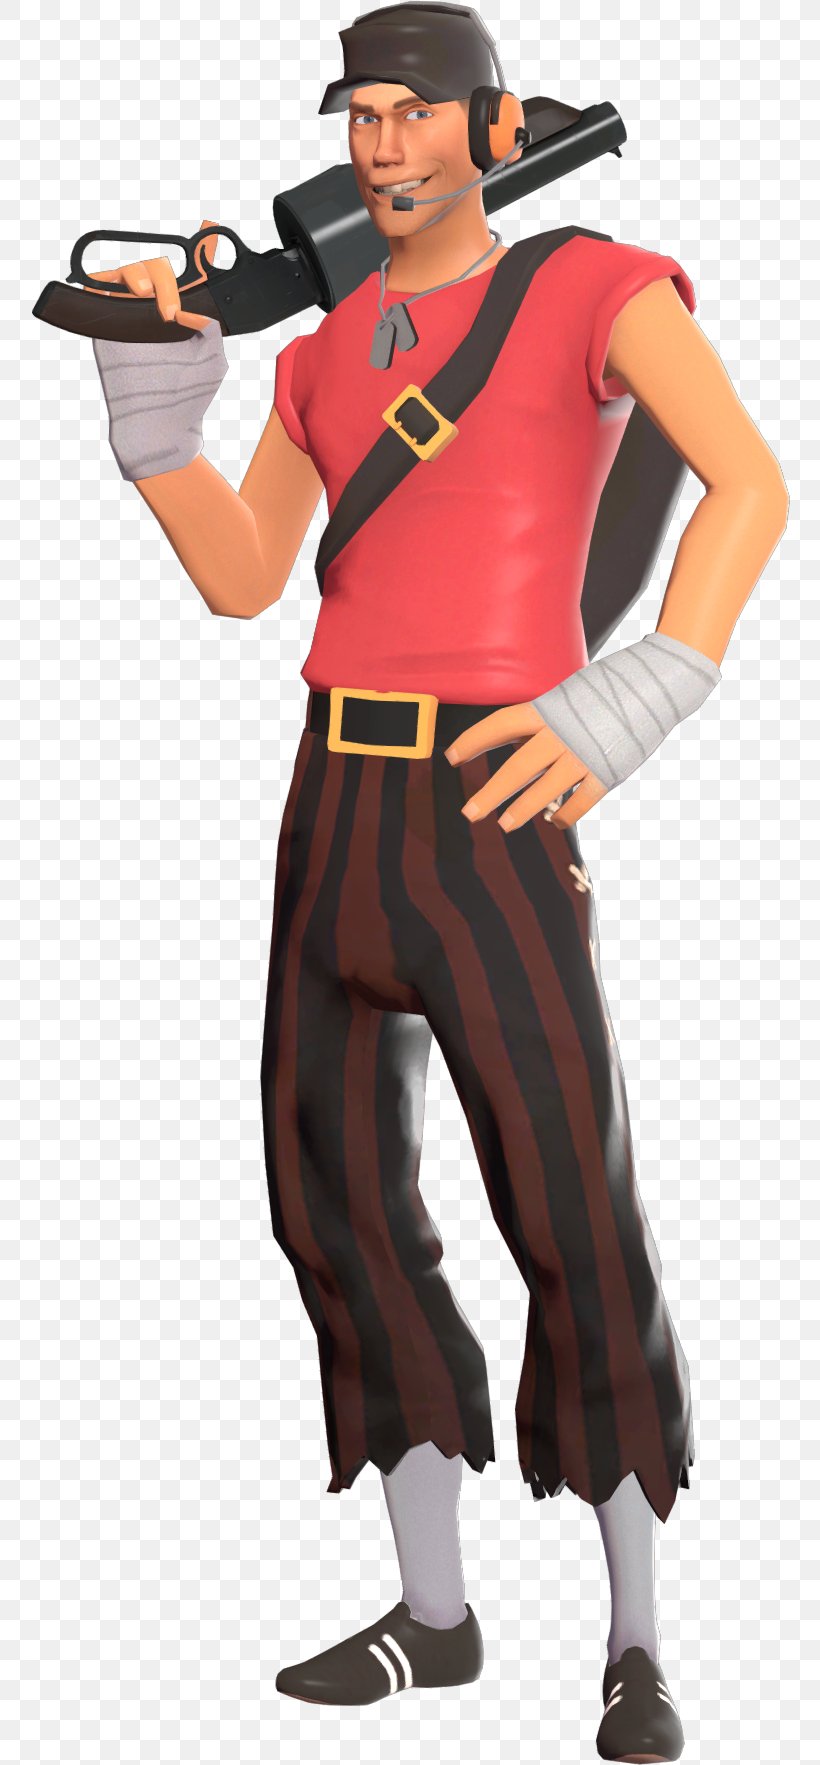 Team Fortress 2 Pants Breeches Wiki Costume, PNG, 760x1765px, Team Fortress 2, Blog, Breeches, Character, Costume Download Free